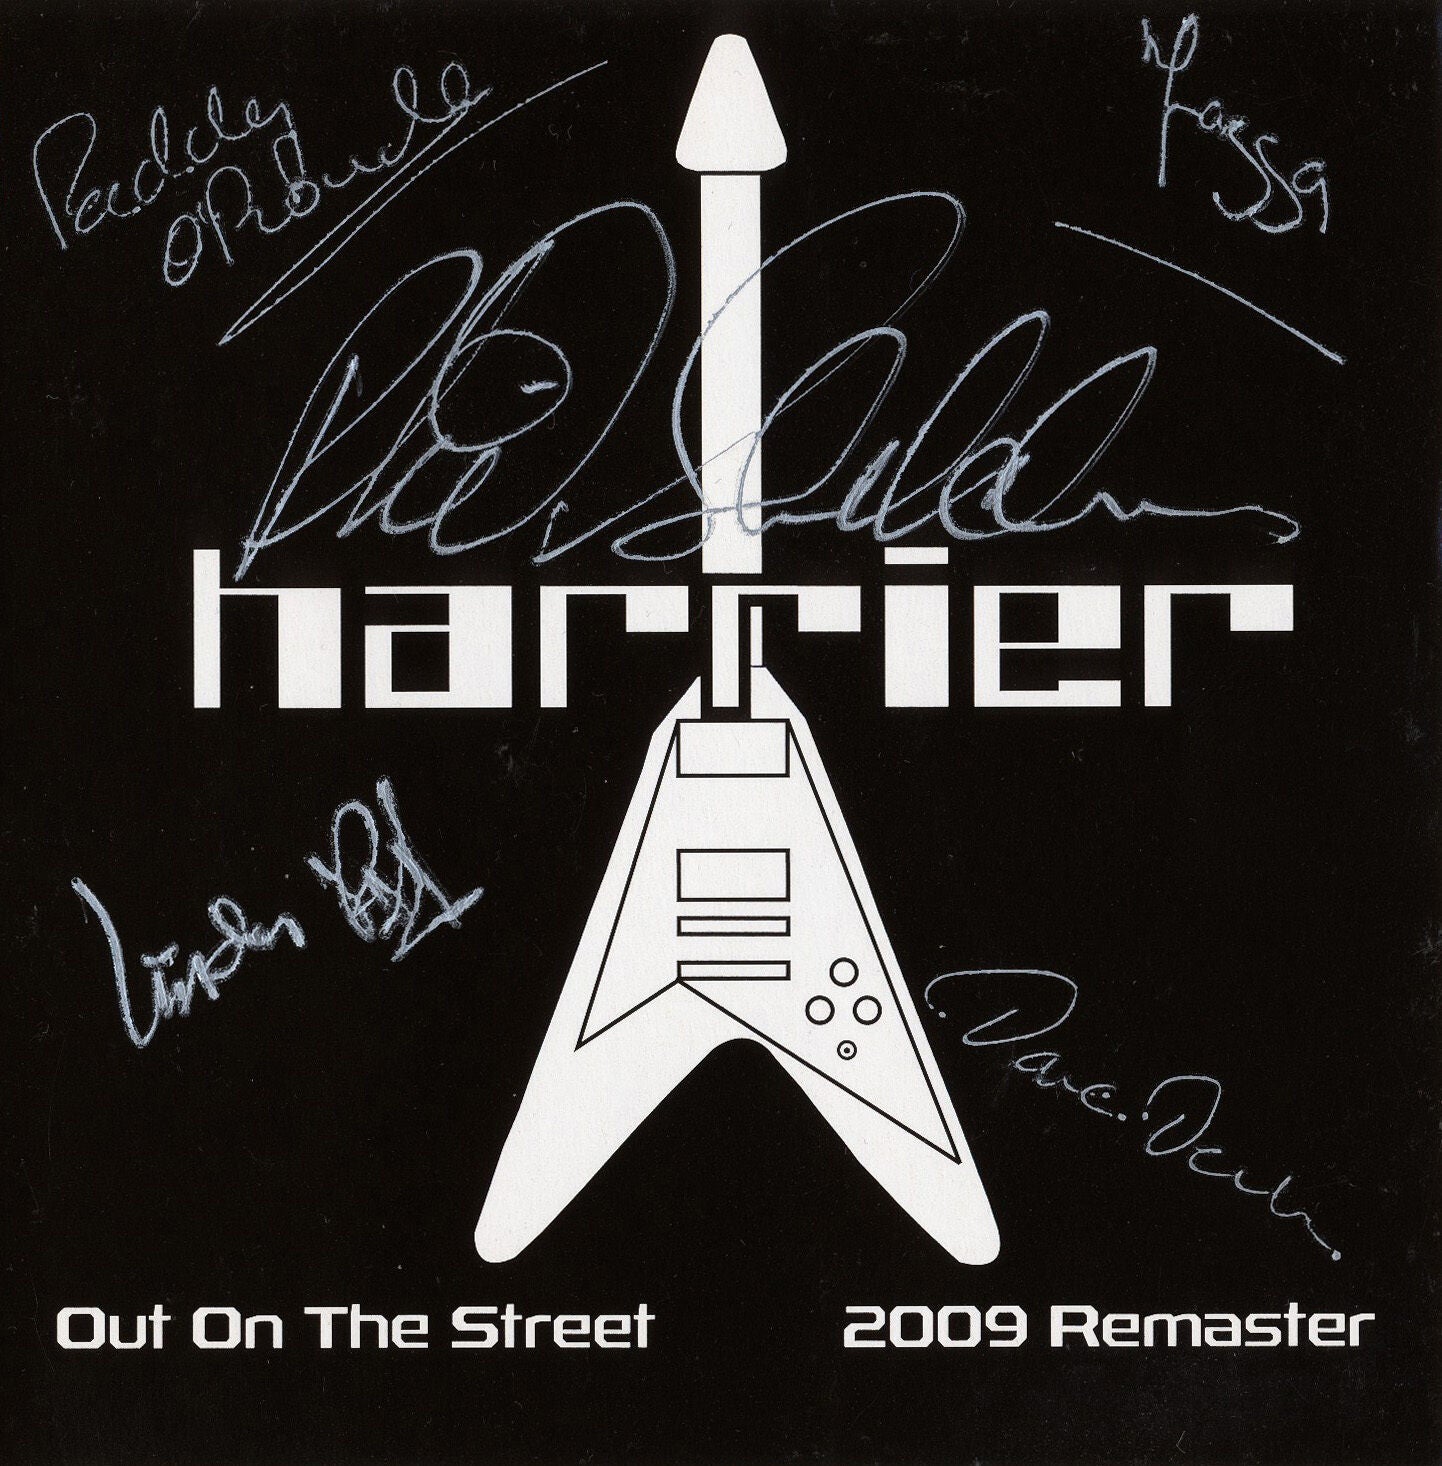 HARRIER - Out On The Street EP CD 2009 Remastered SIGNED Cardboard-Sleeve NWOBHM